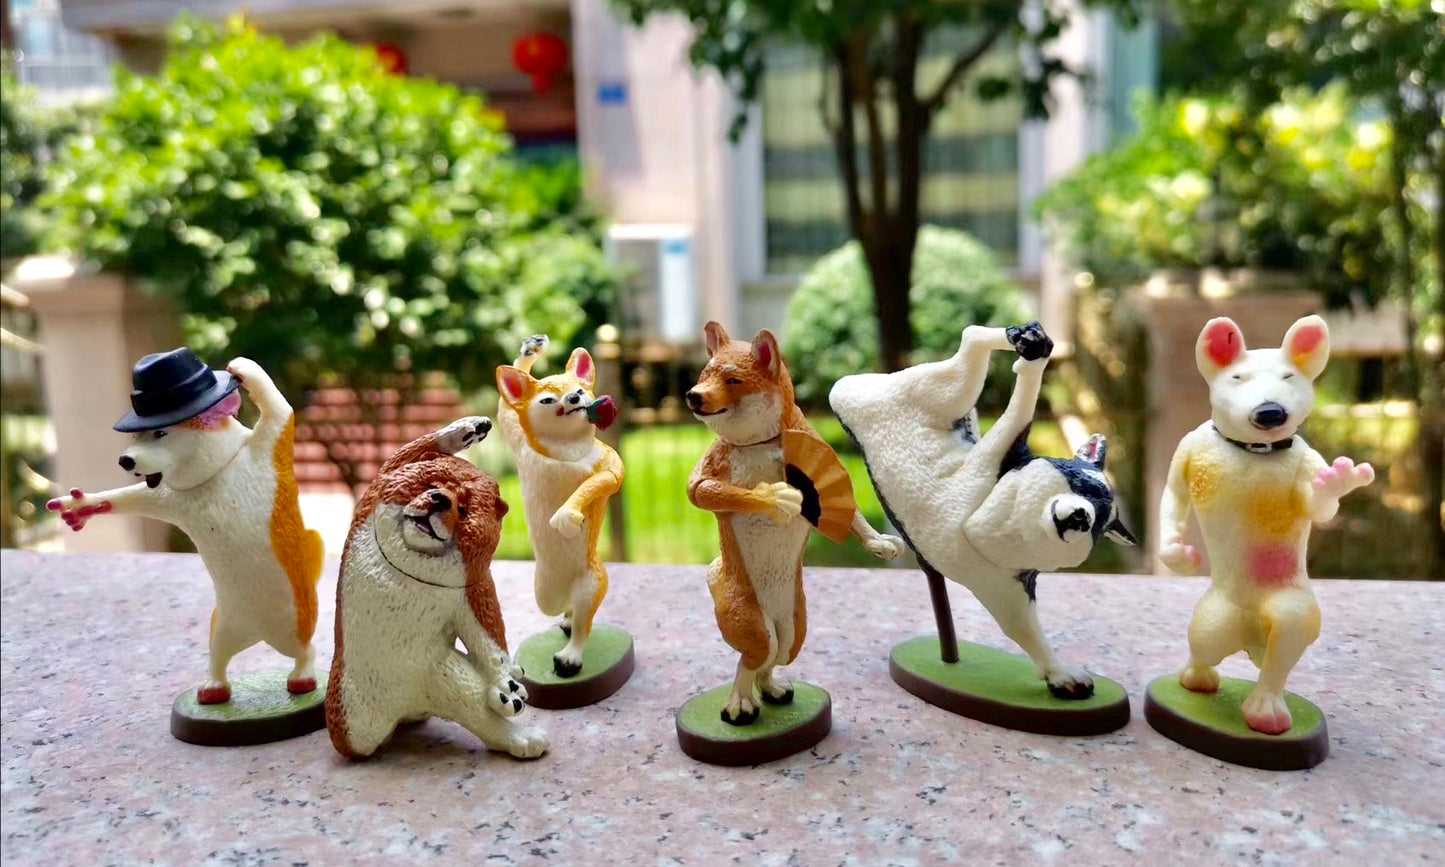 X 70715 DANCING DOG FIGURINES-DISCONTINUED